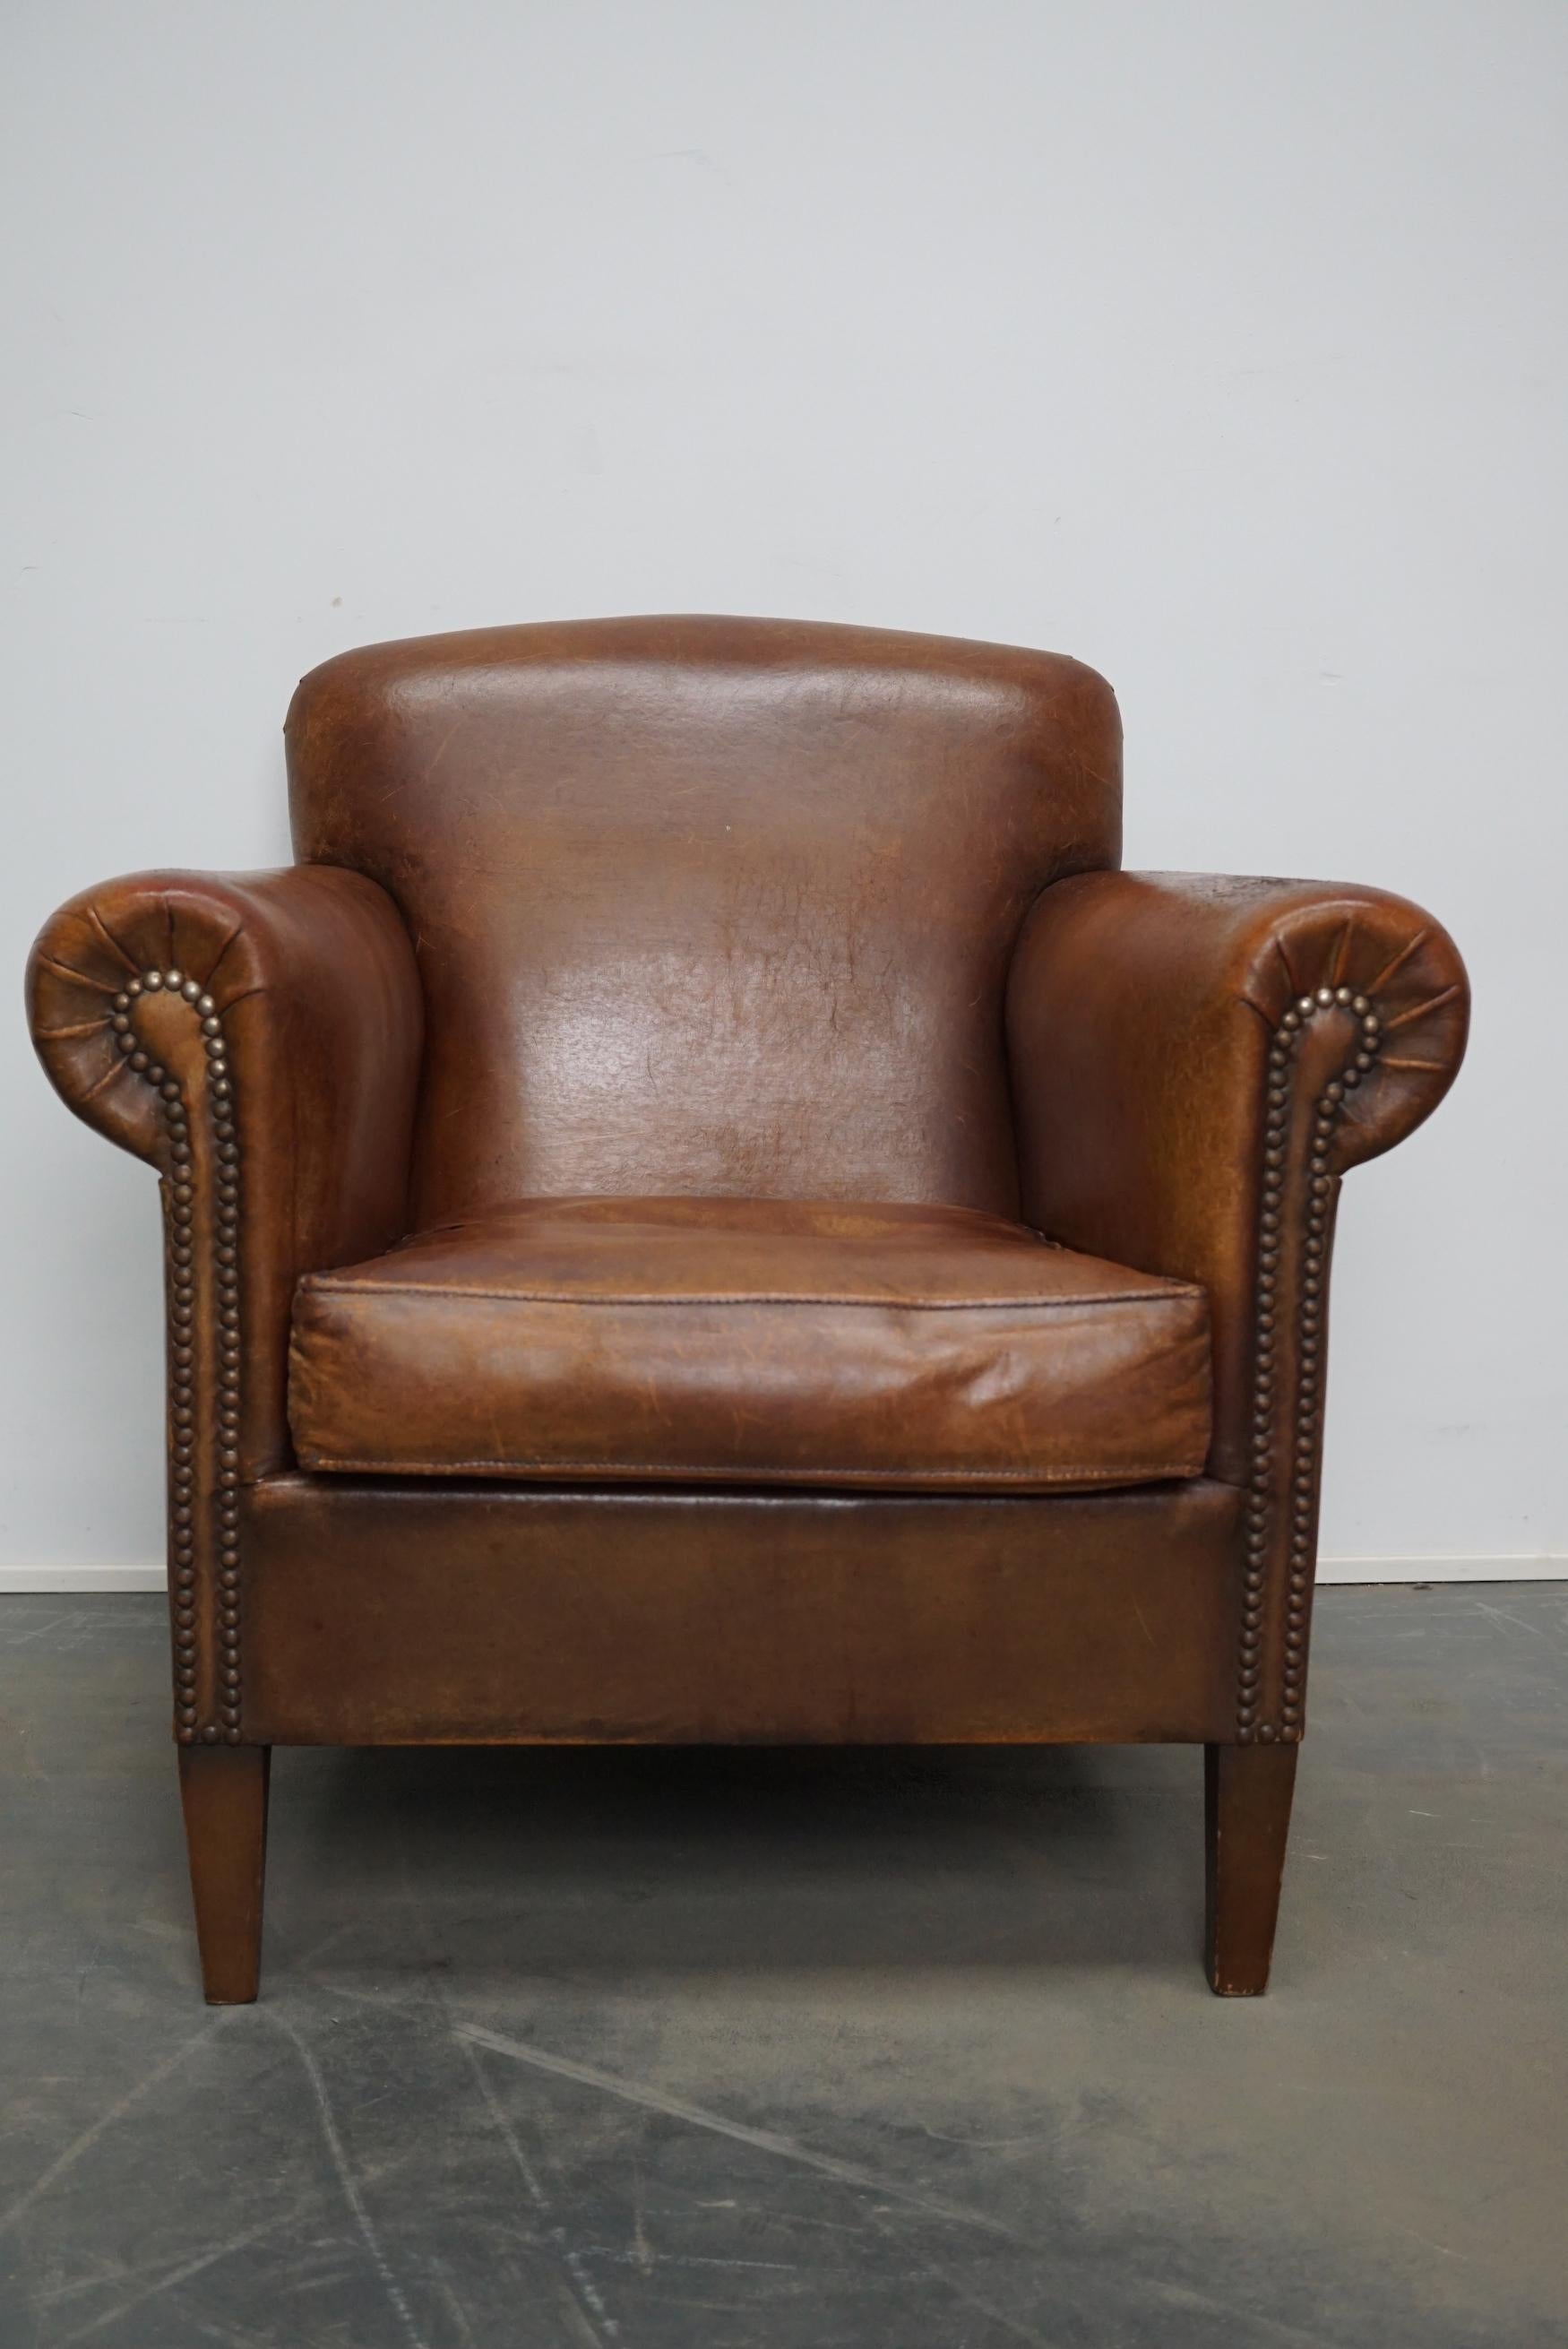 This vintage club chair is upholstered with cognac-colored leather and features metal rivets and wooden legs.

 